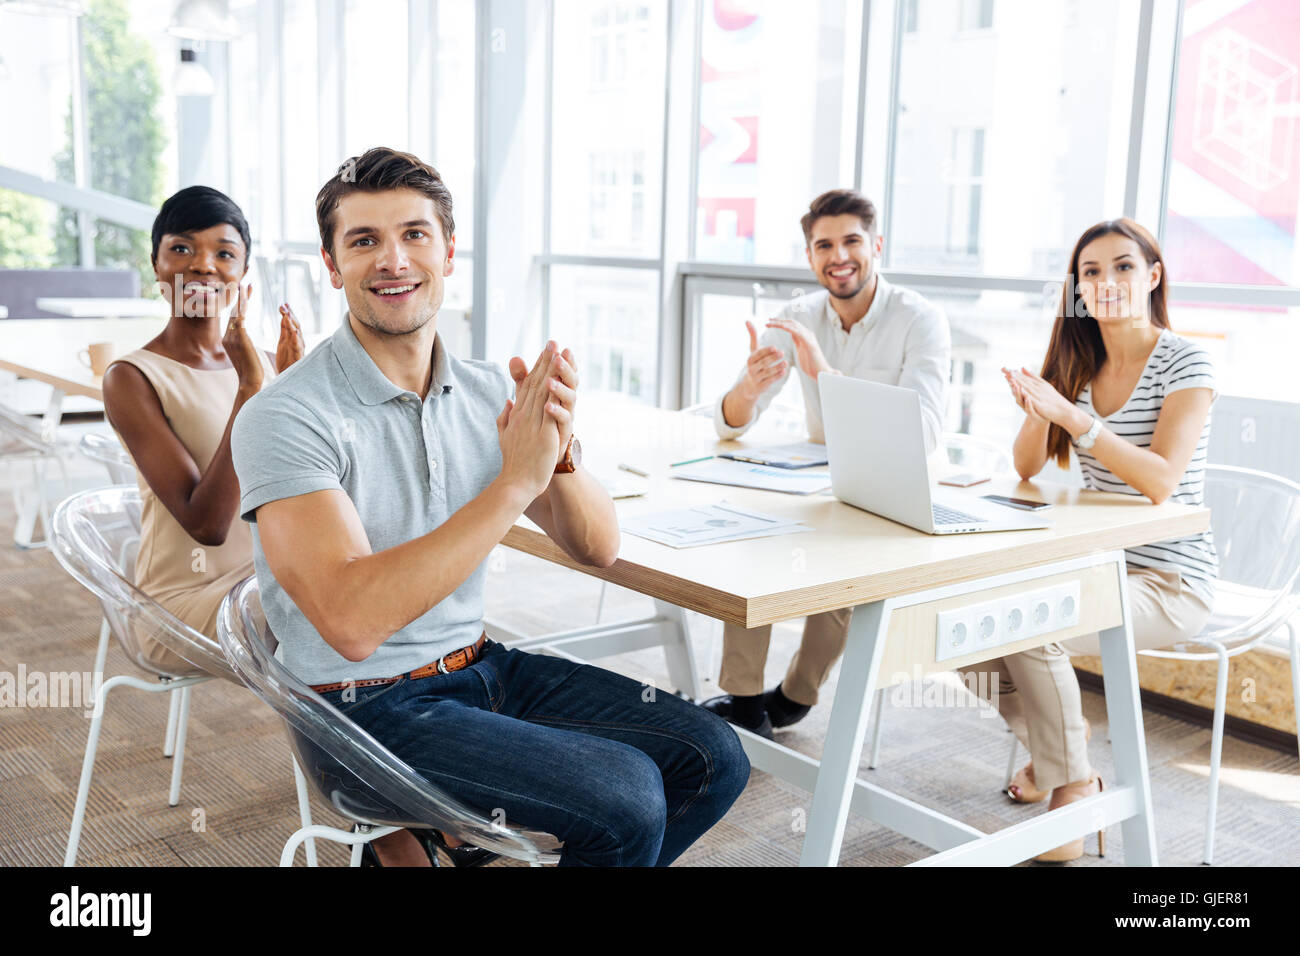 Group of cheerful young business people sitting on presentation in office and clapping Stock Photo